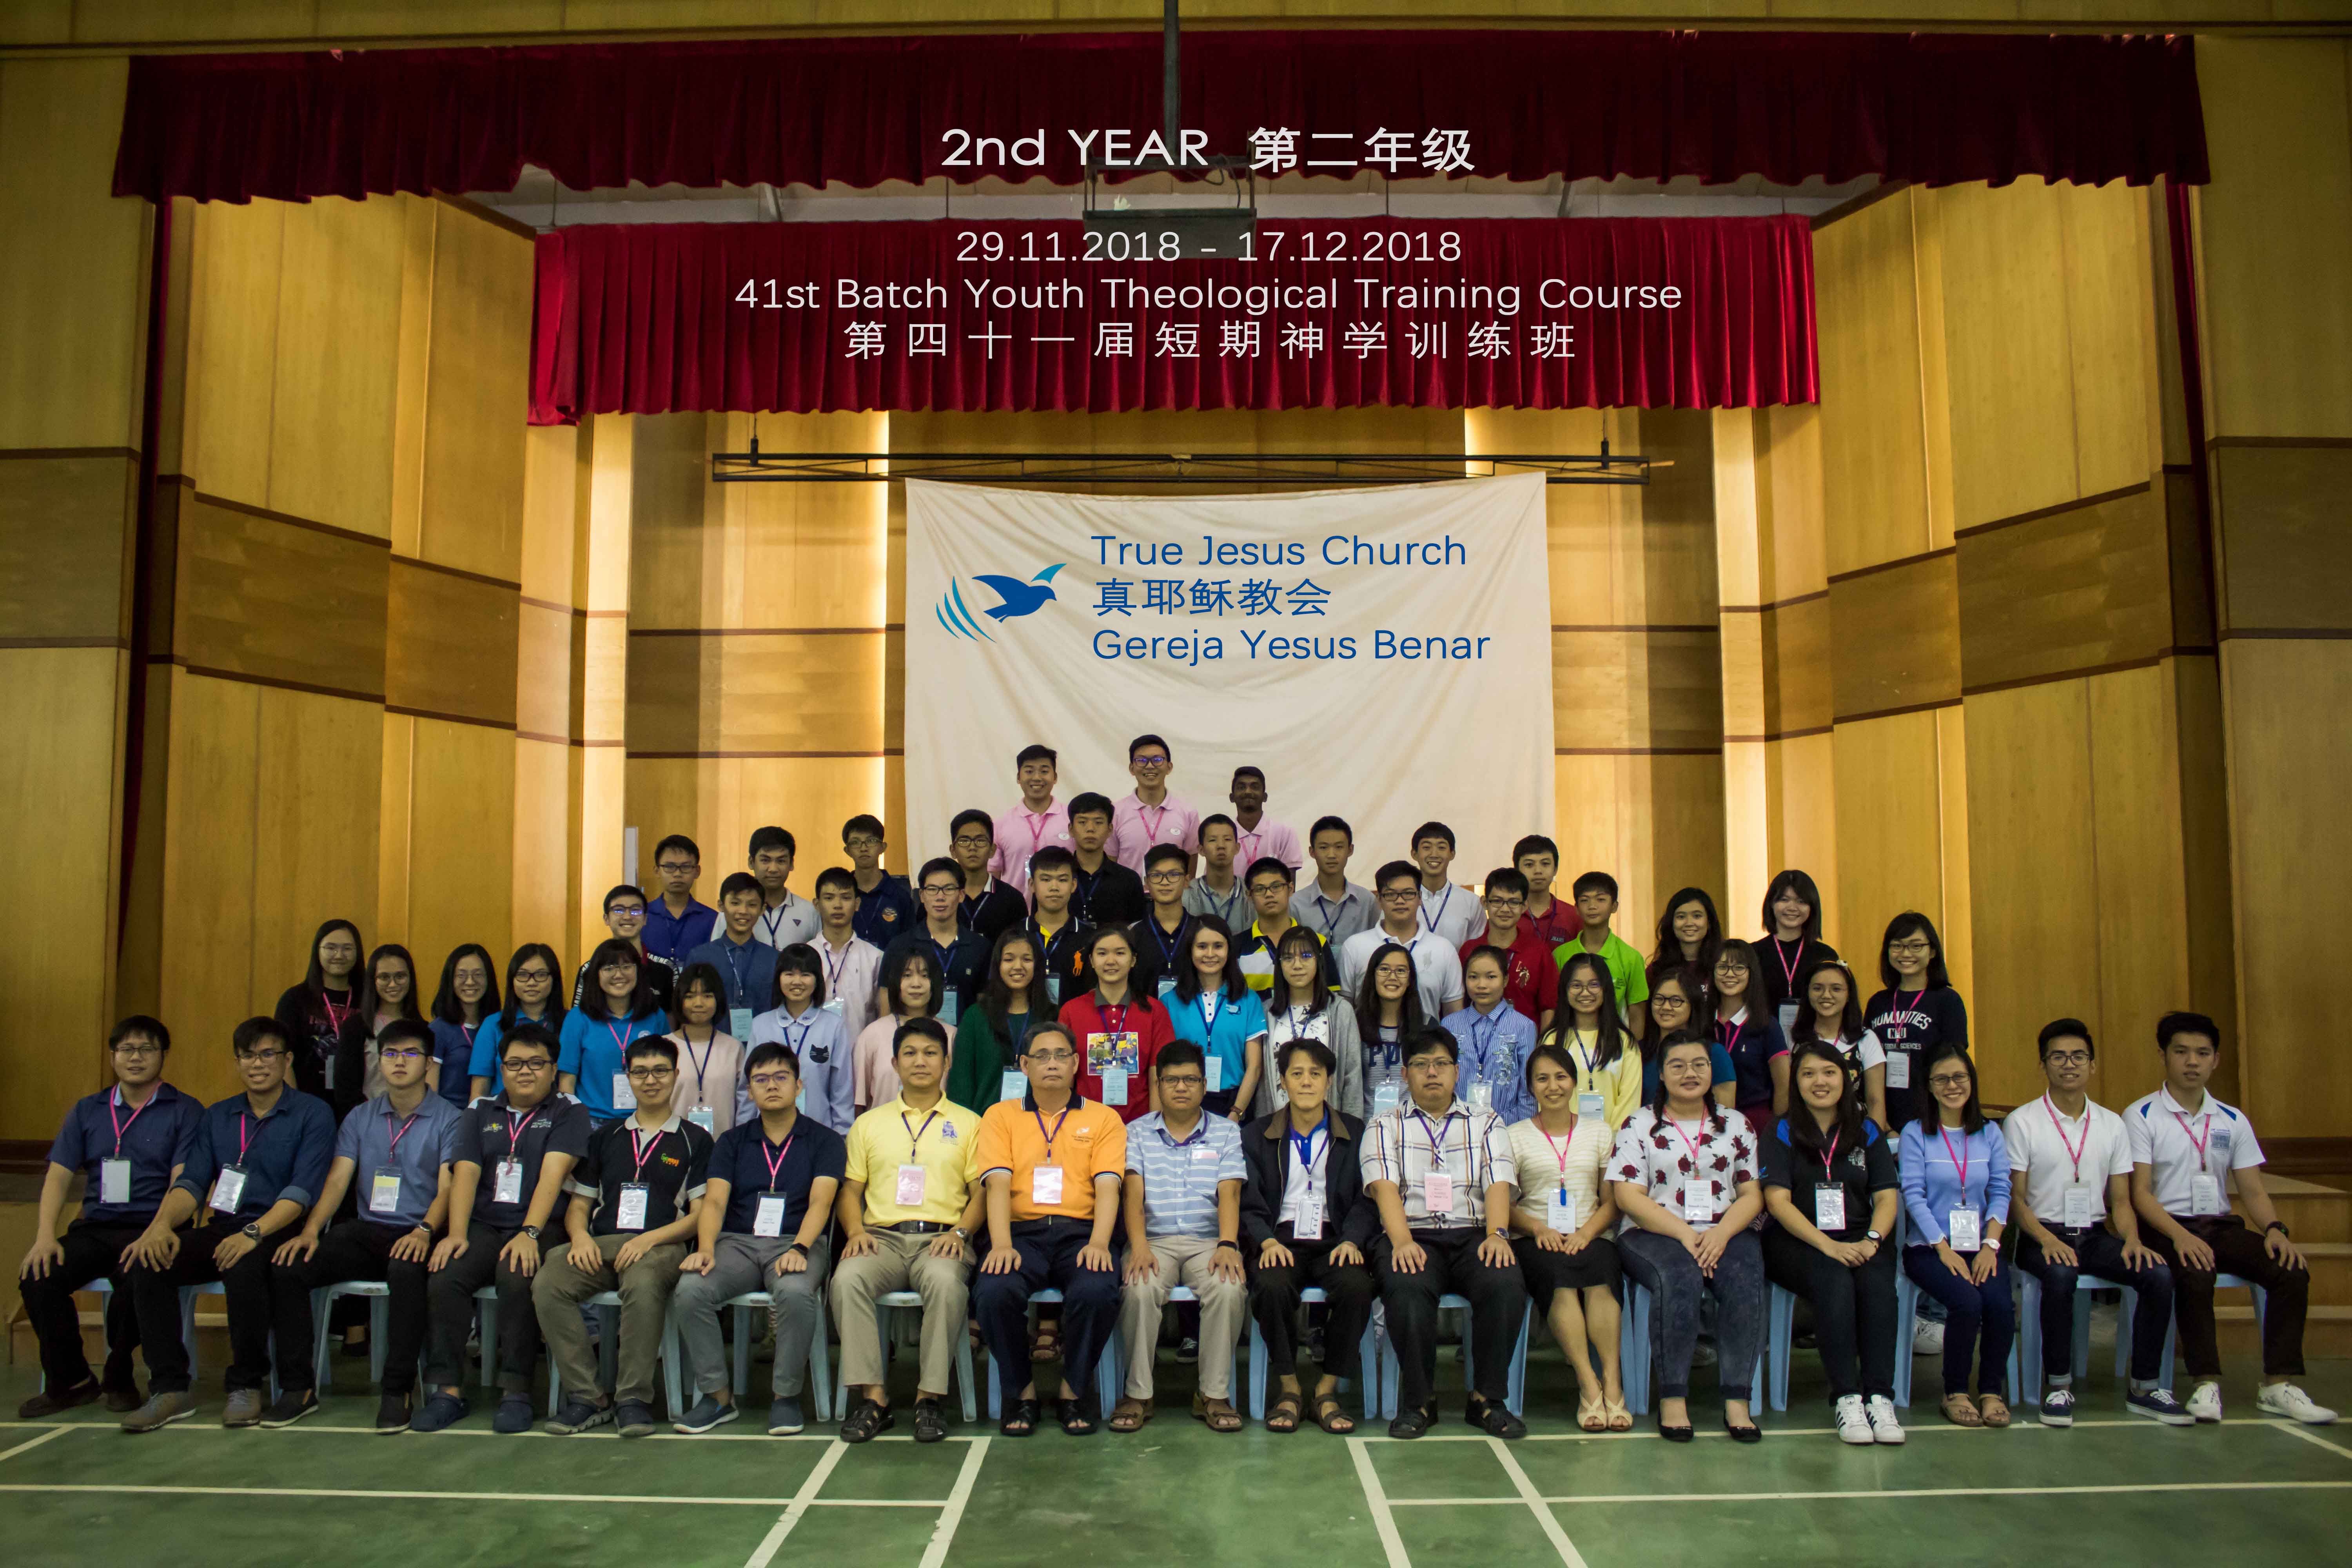 The 42nd Batch of Youth Theological Training Course
(Chinese and English language class)